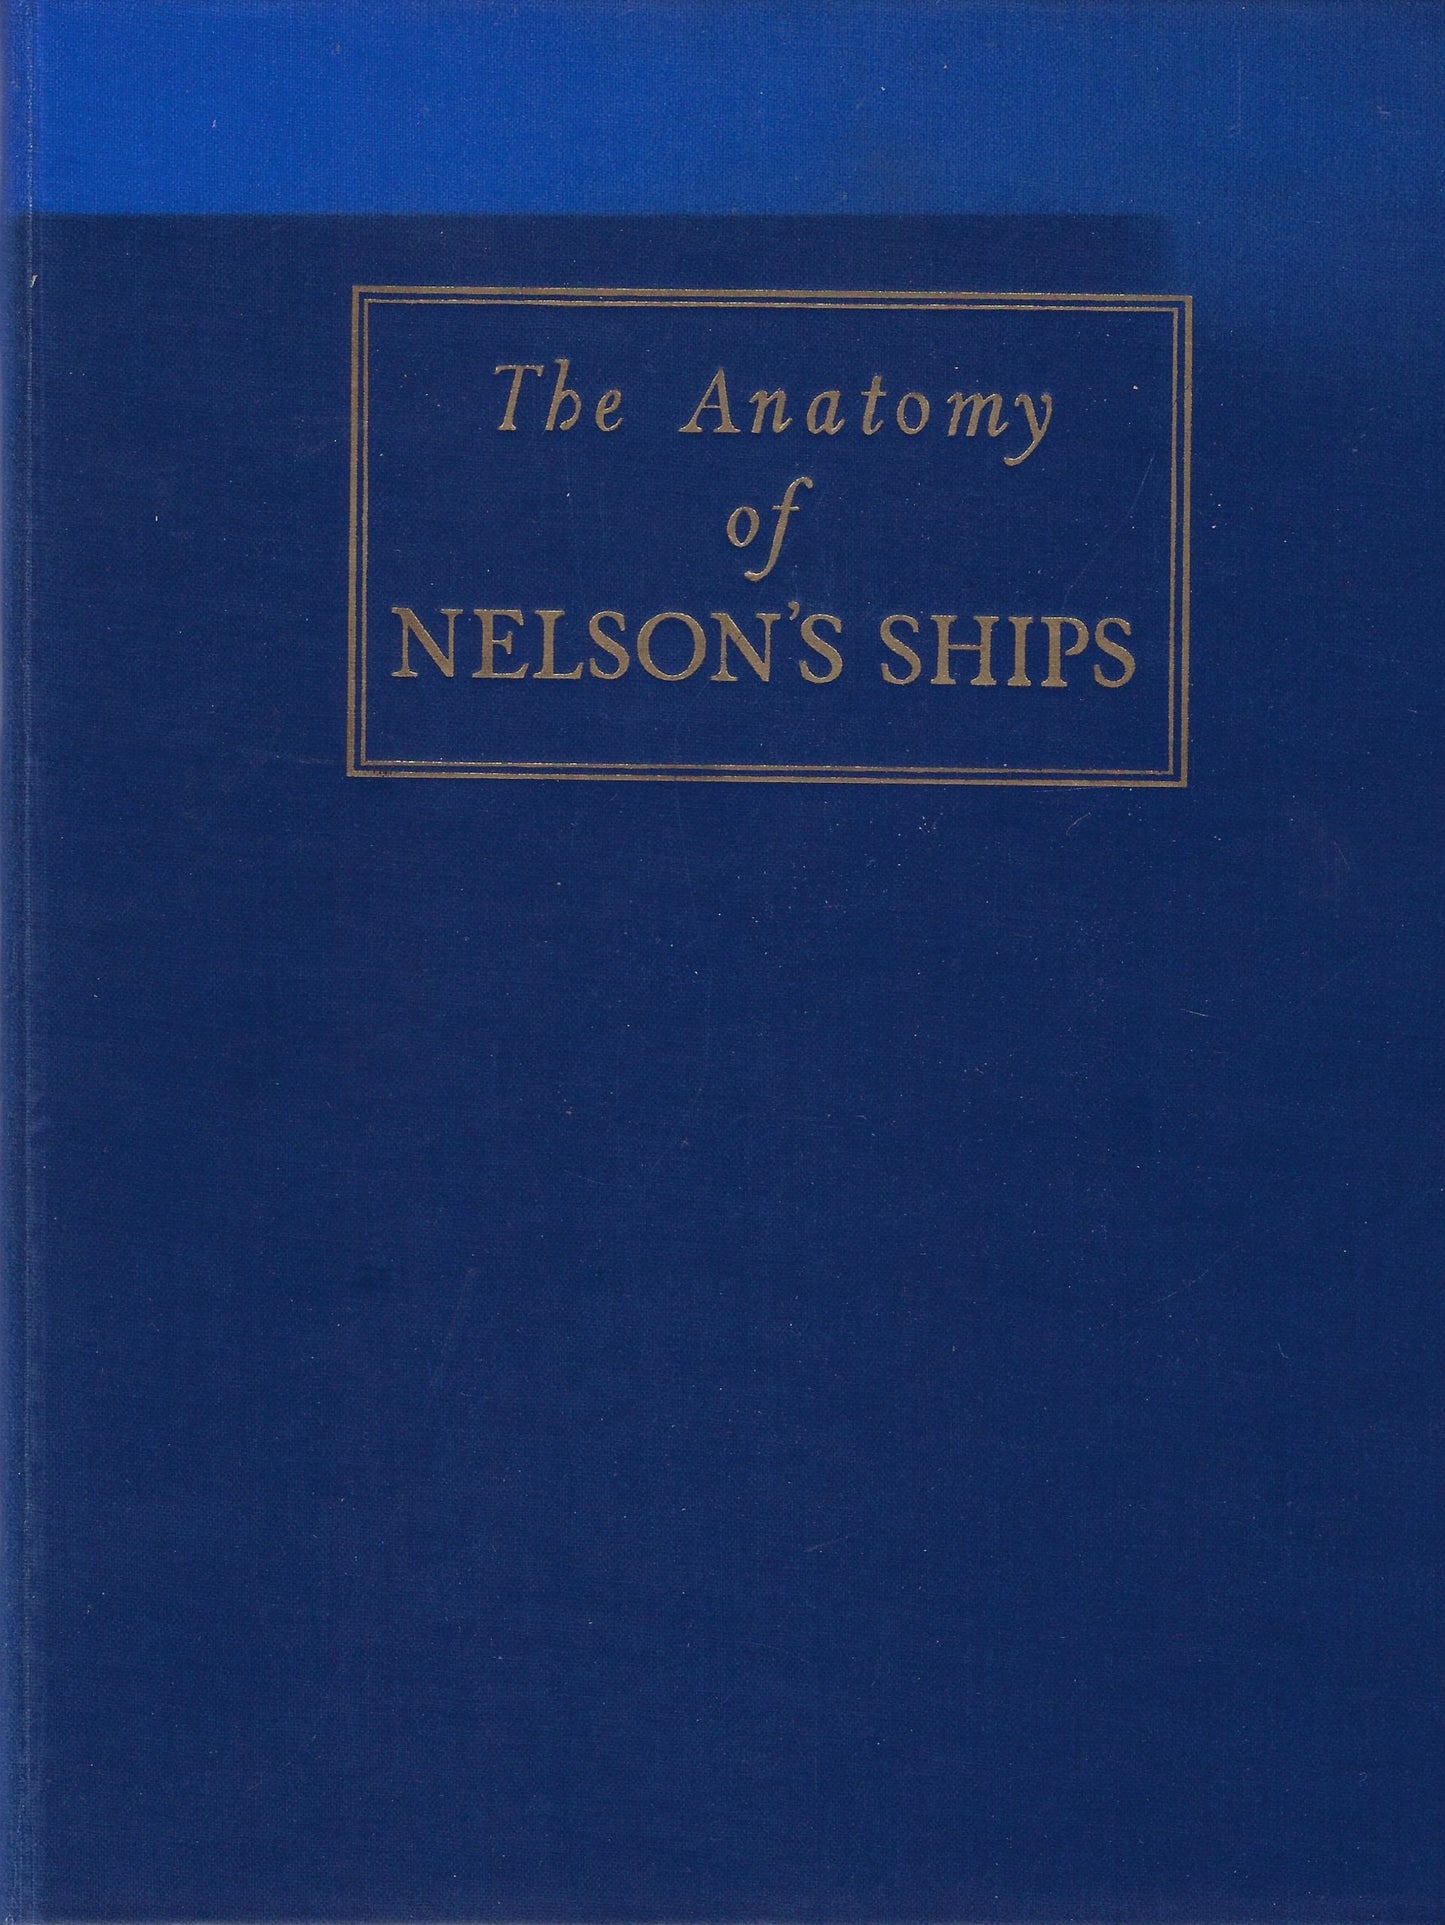 The anatomy of Nelson's ships